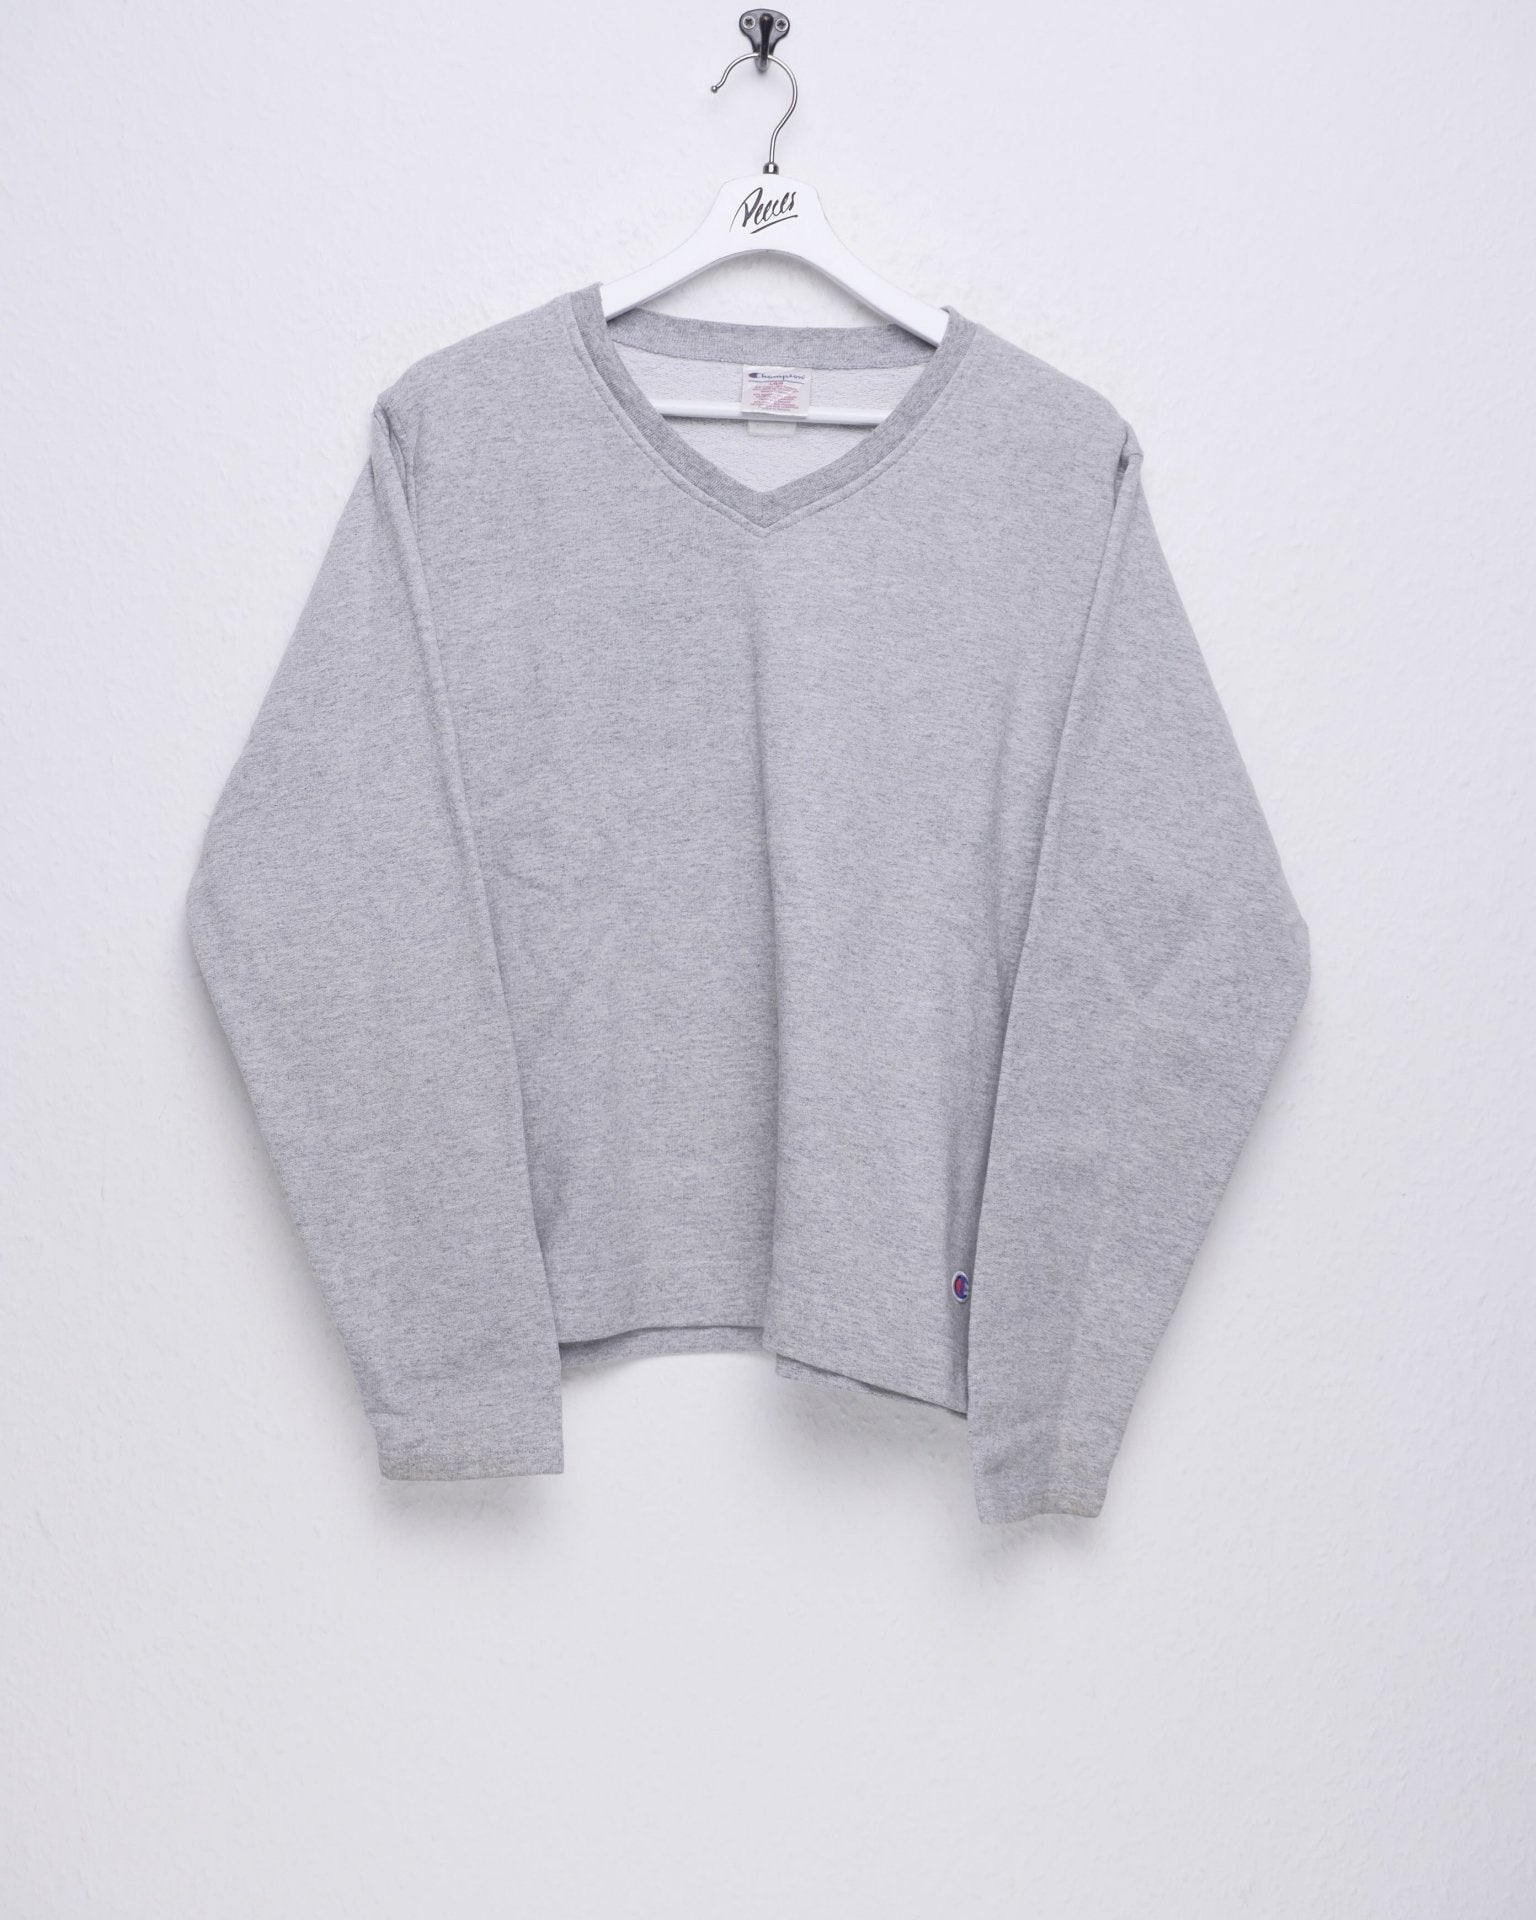 Champion embroidered Logo grey Vintage Sweater - Peeces